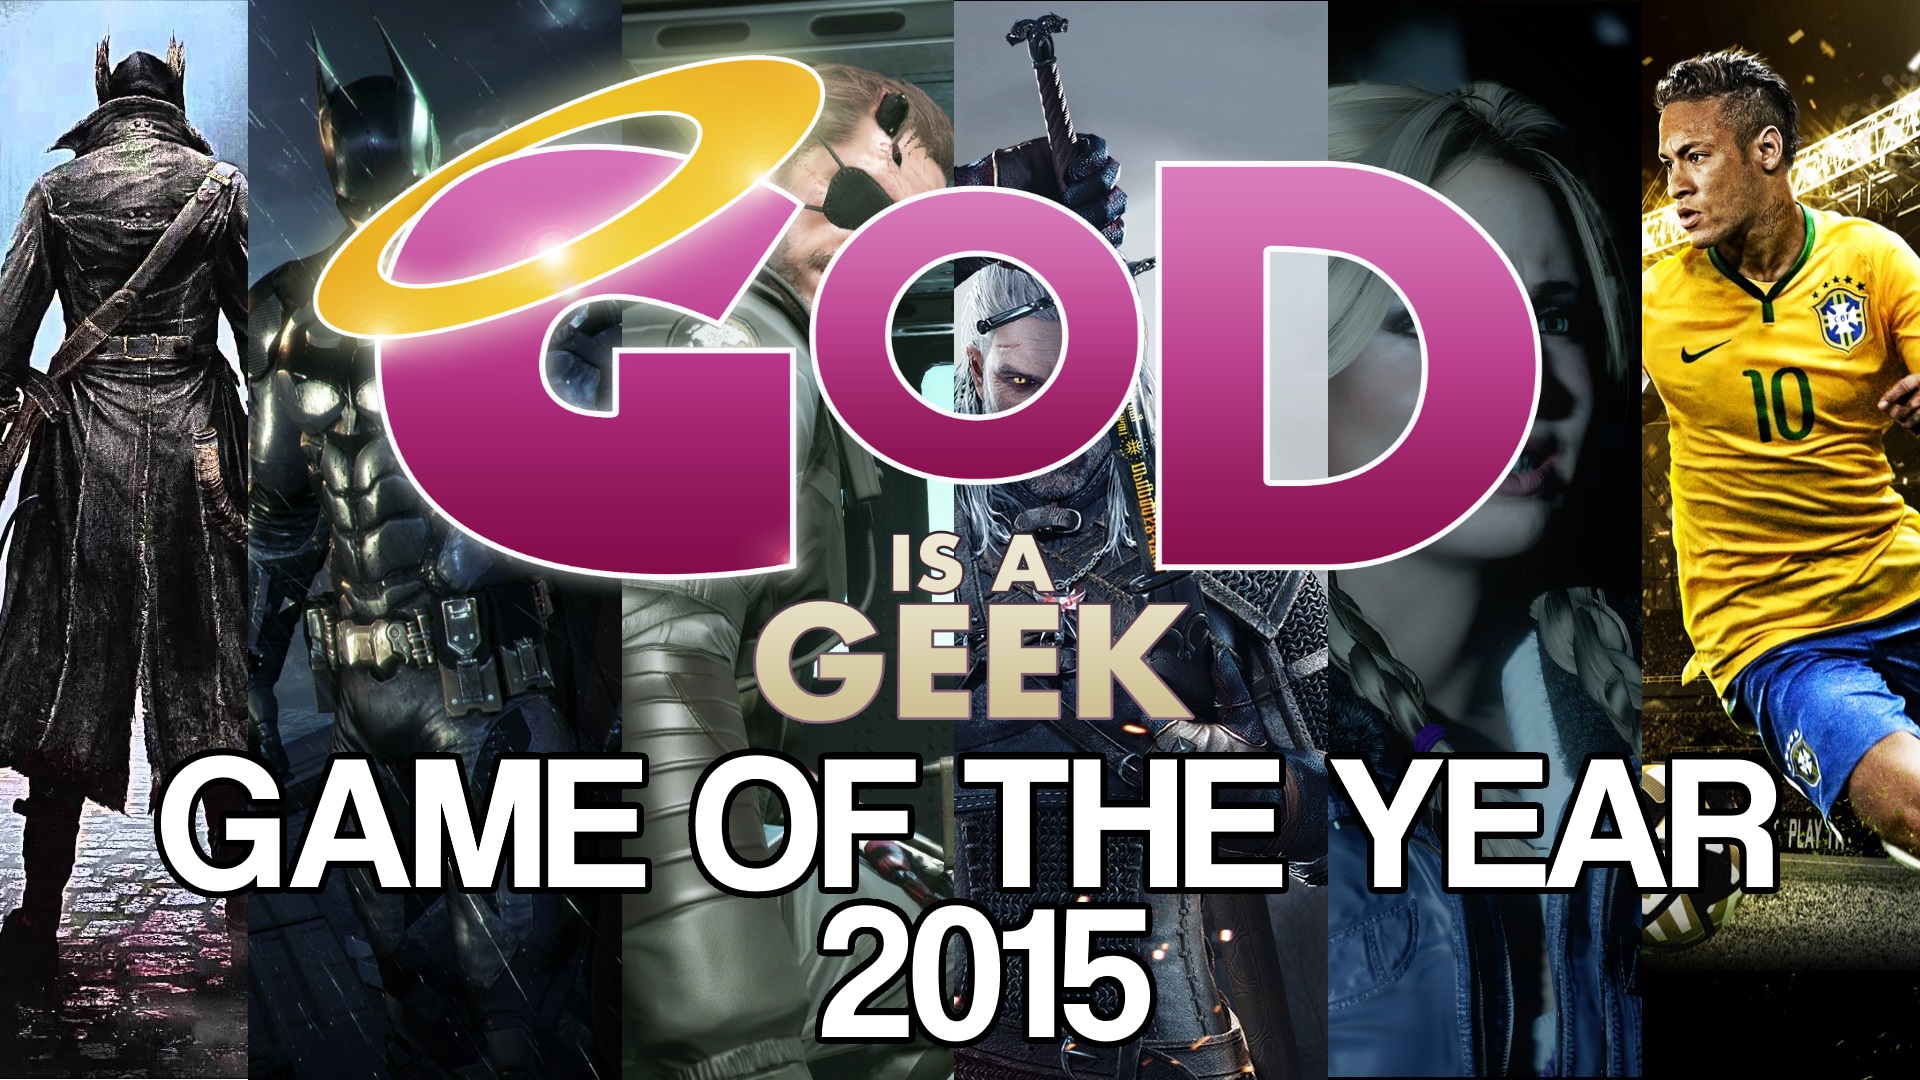 The God is a Geek Top 10 Games of 2015 List